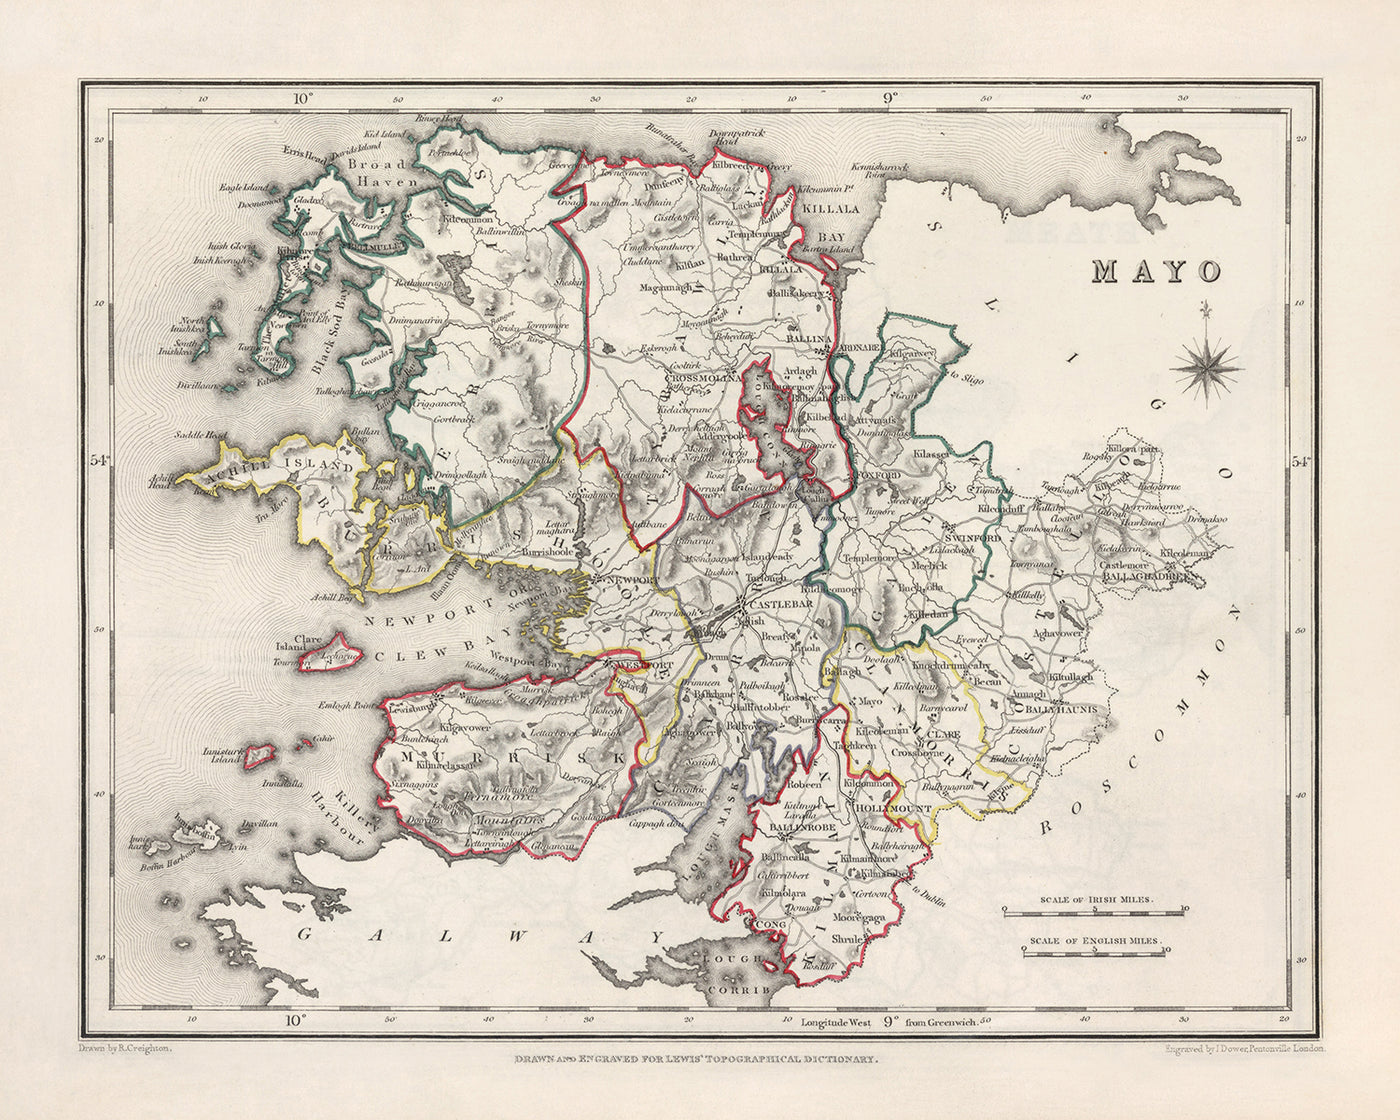 Old Map of County Mayo by Samuel Lewis, 1844: Westport, Ballina, Castlebar, Achill Island, Clew Bay